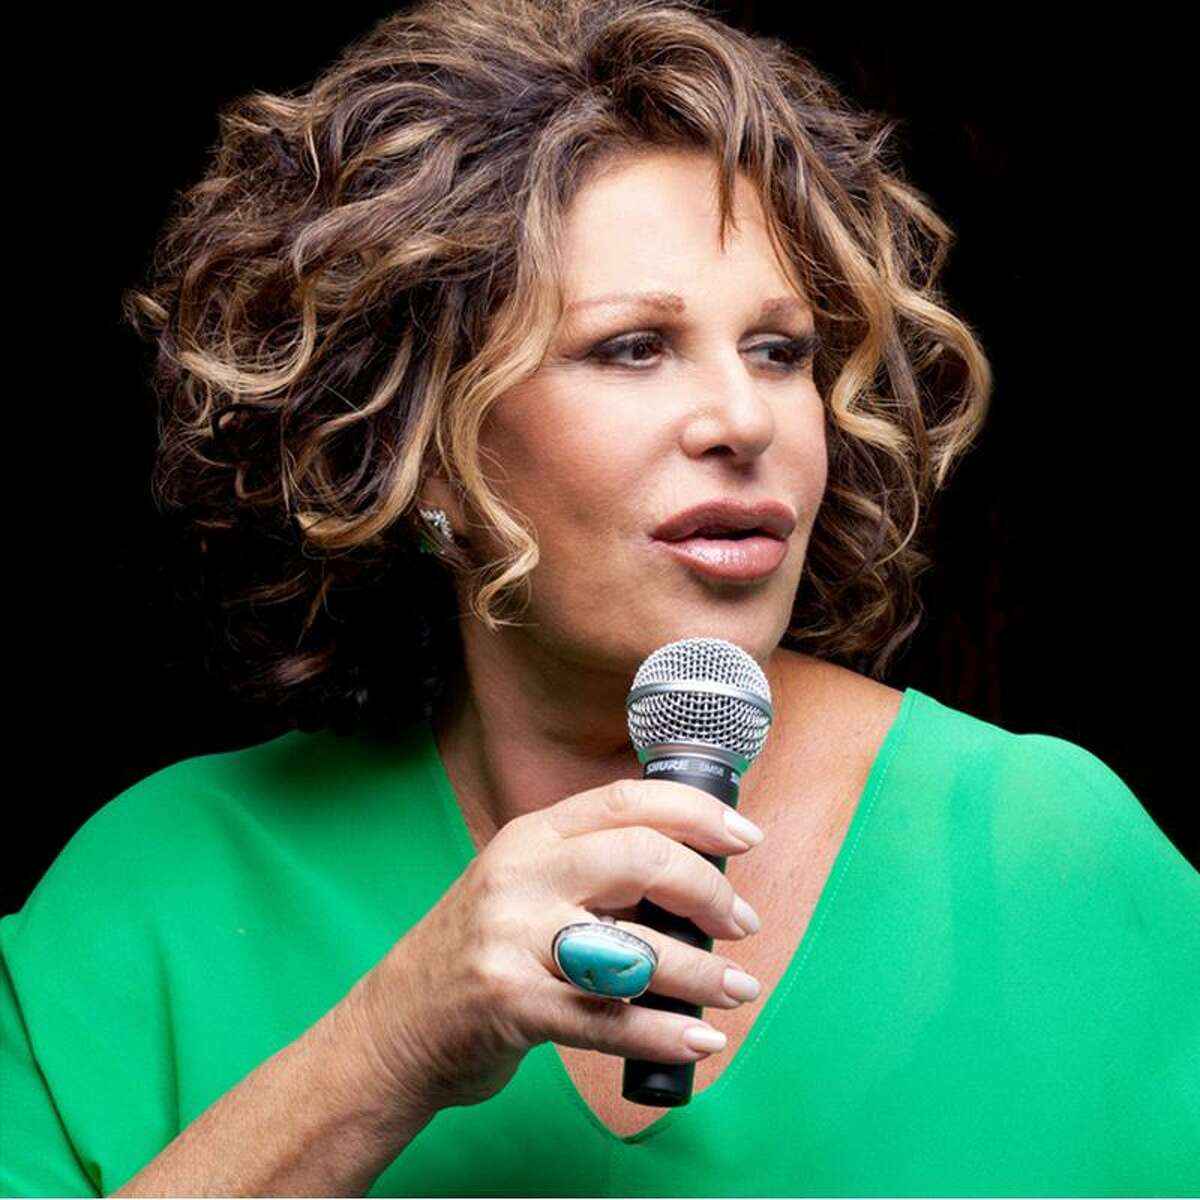 Stage and screen starLainie Kazan will perform at the White Plains Performing Arts Center November 9 to help celebrate the Westchester theater’s 16th anniversary. In Kazan’s night of songs, she’ll reflect on her life, her loves, her Broadway shows, TV series and movies.